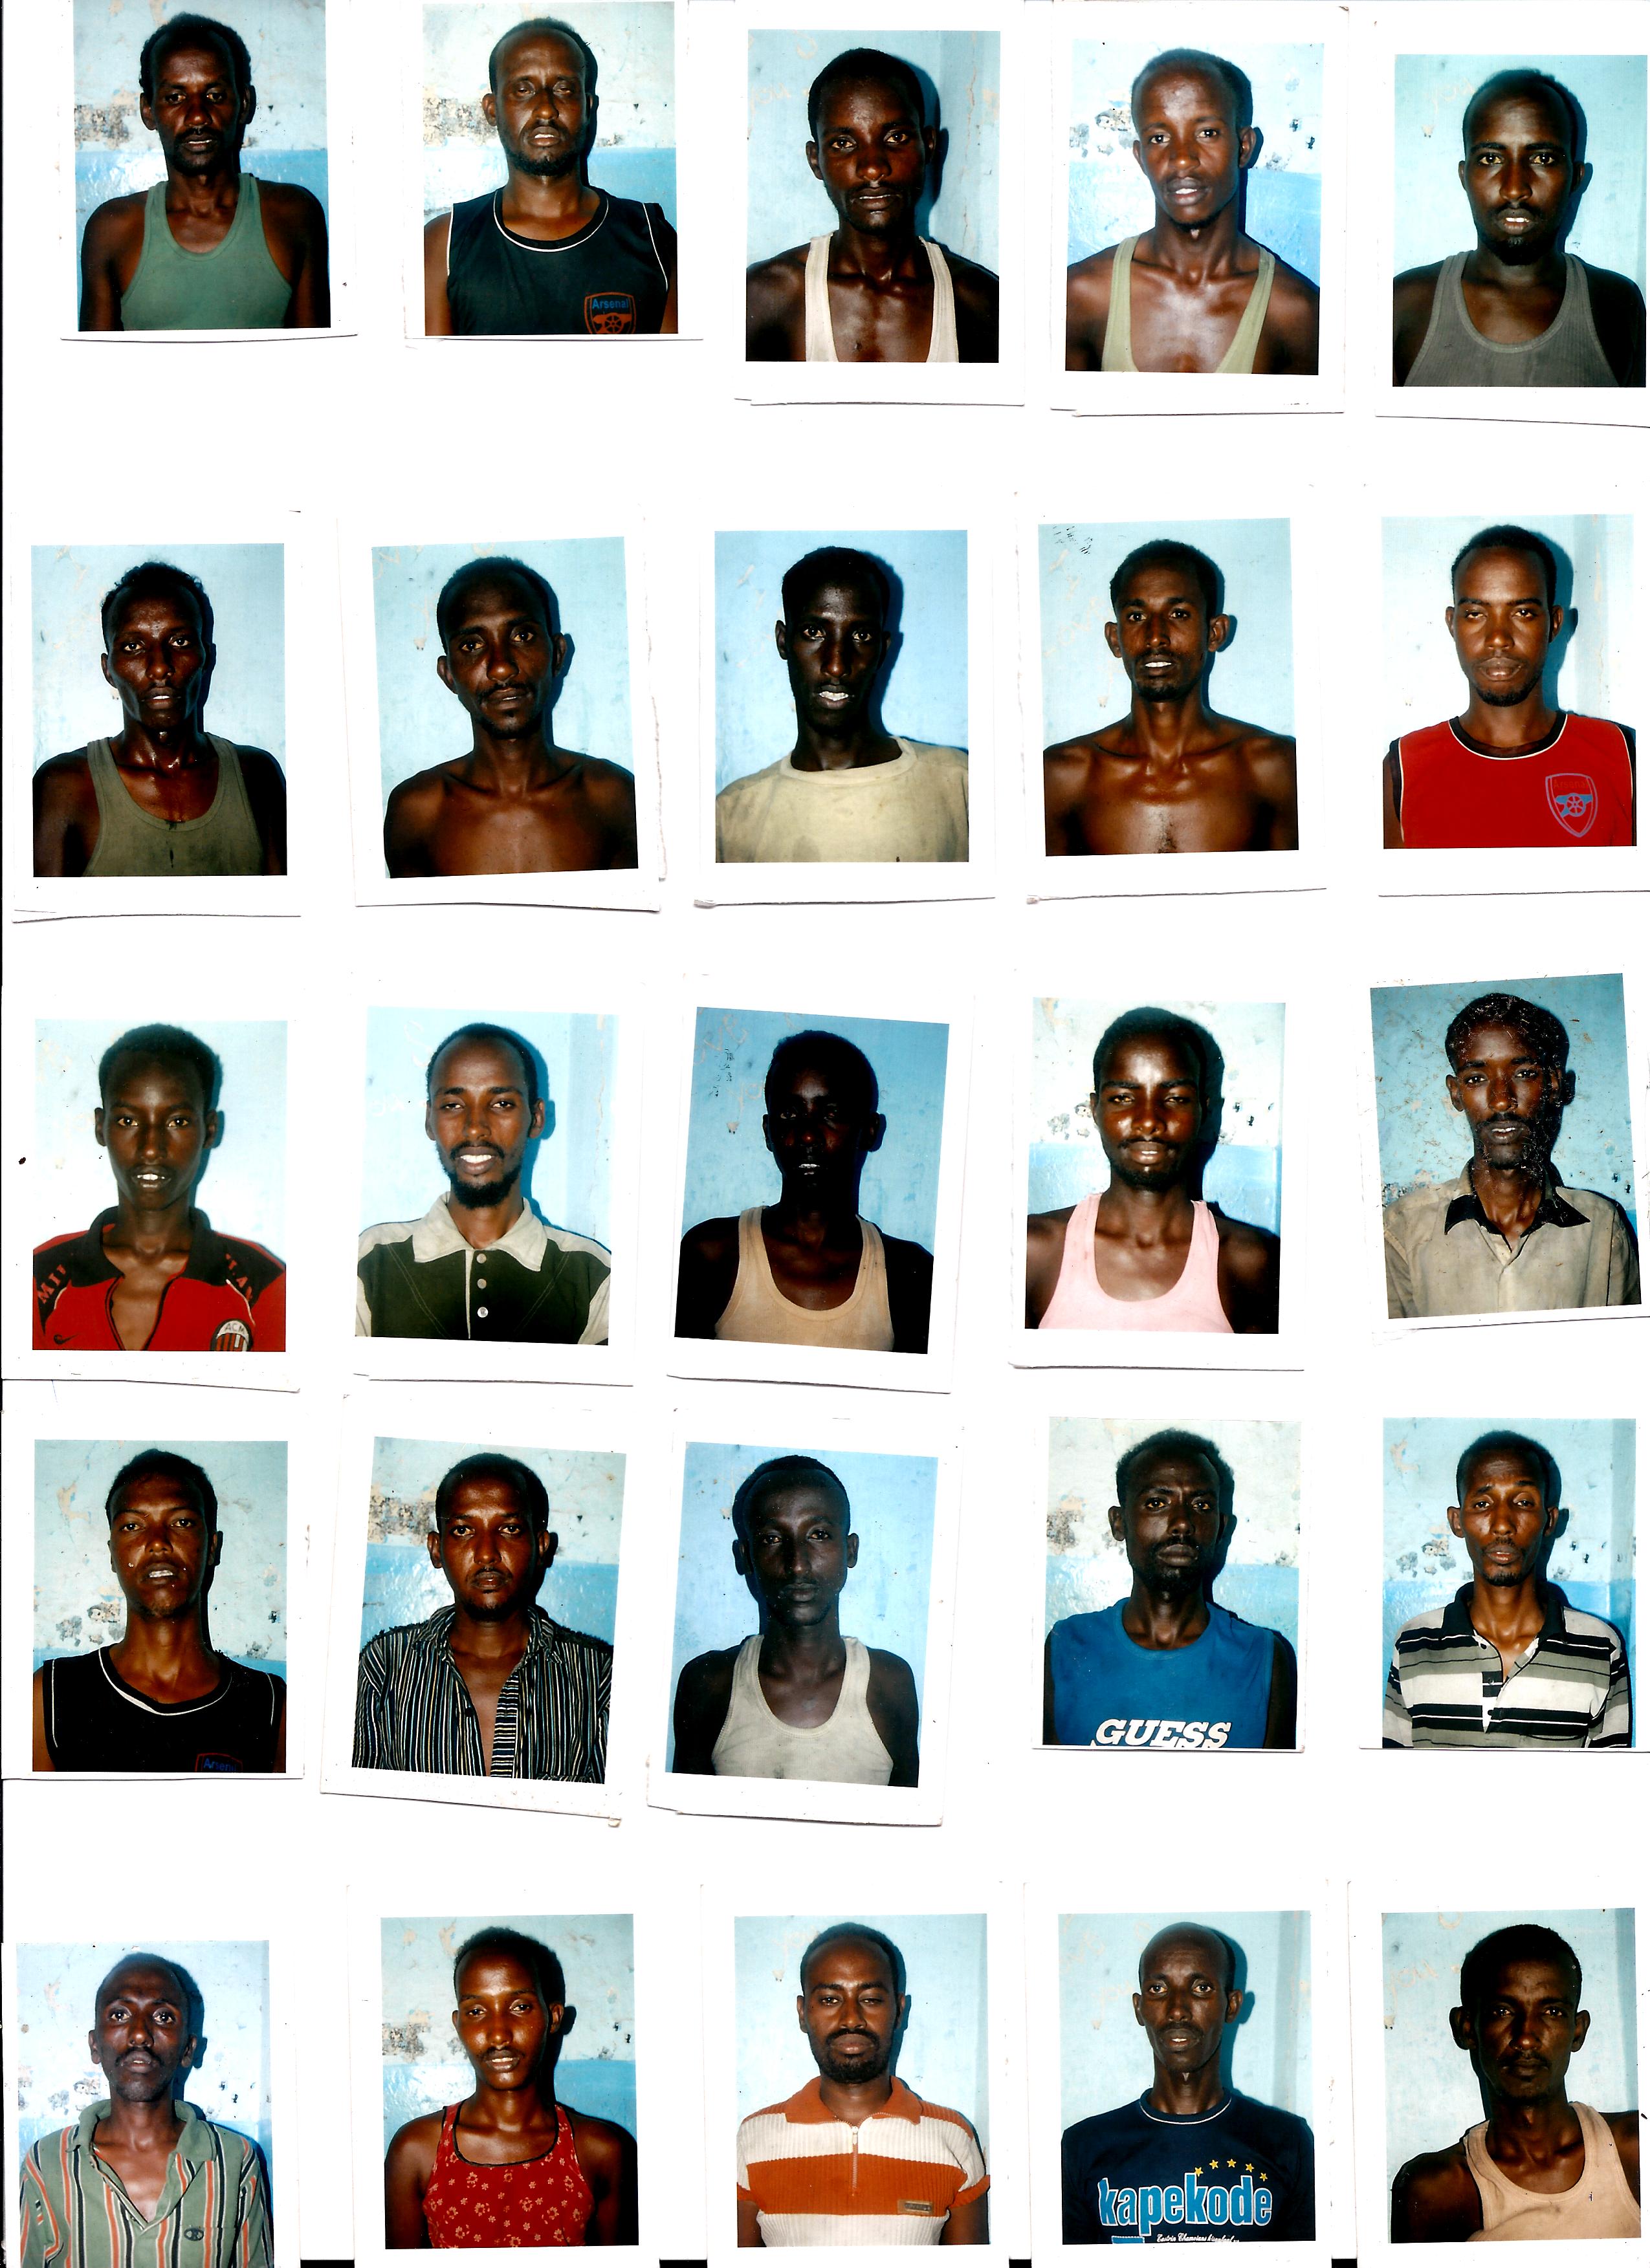 Details of Somali young men sentenced death by an Indian court